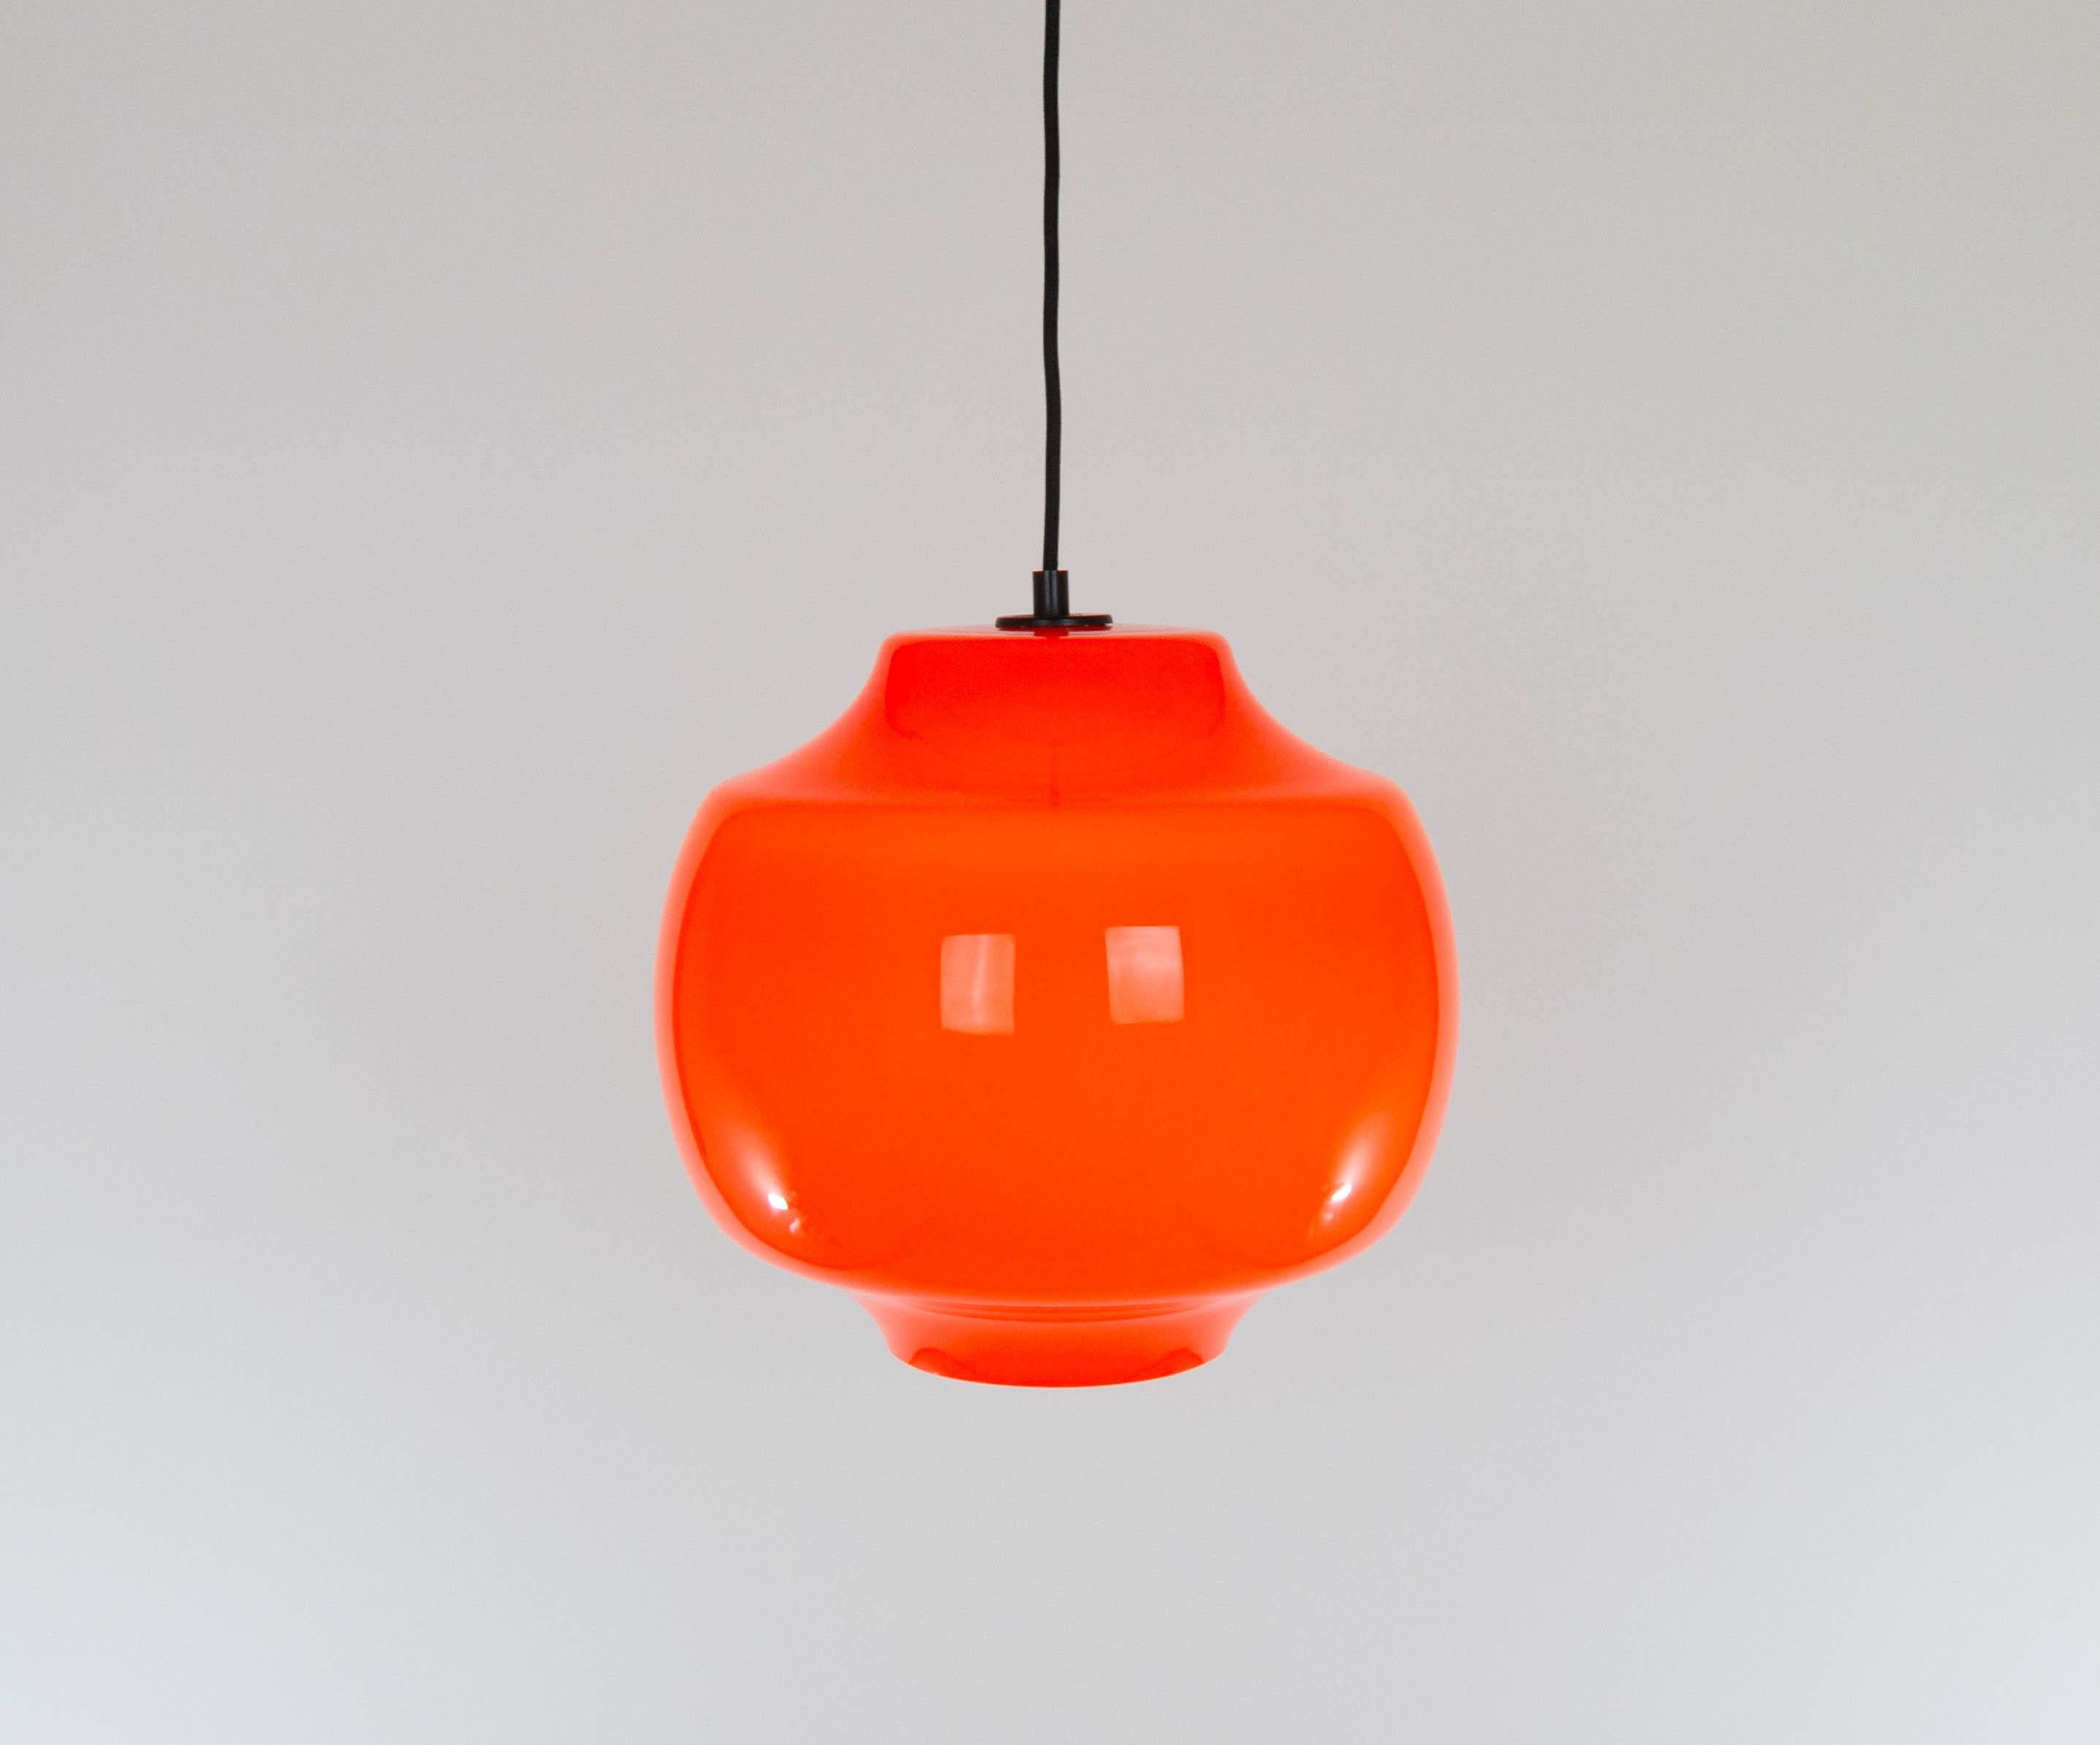 Red Model L 63 glass pendant designed in the 1960s by Alessandro Pianon for Venetian glassmaker Vistosi.

The glass is subtle and still in beautiful vintage condition. The metal ceiling cap is original. 

The lamp has been rewired with 2 m high-end